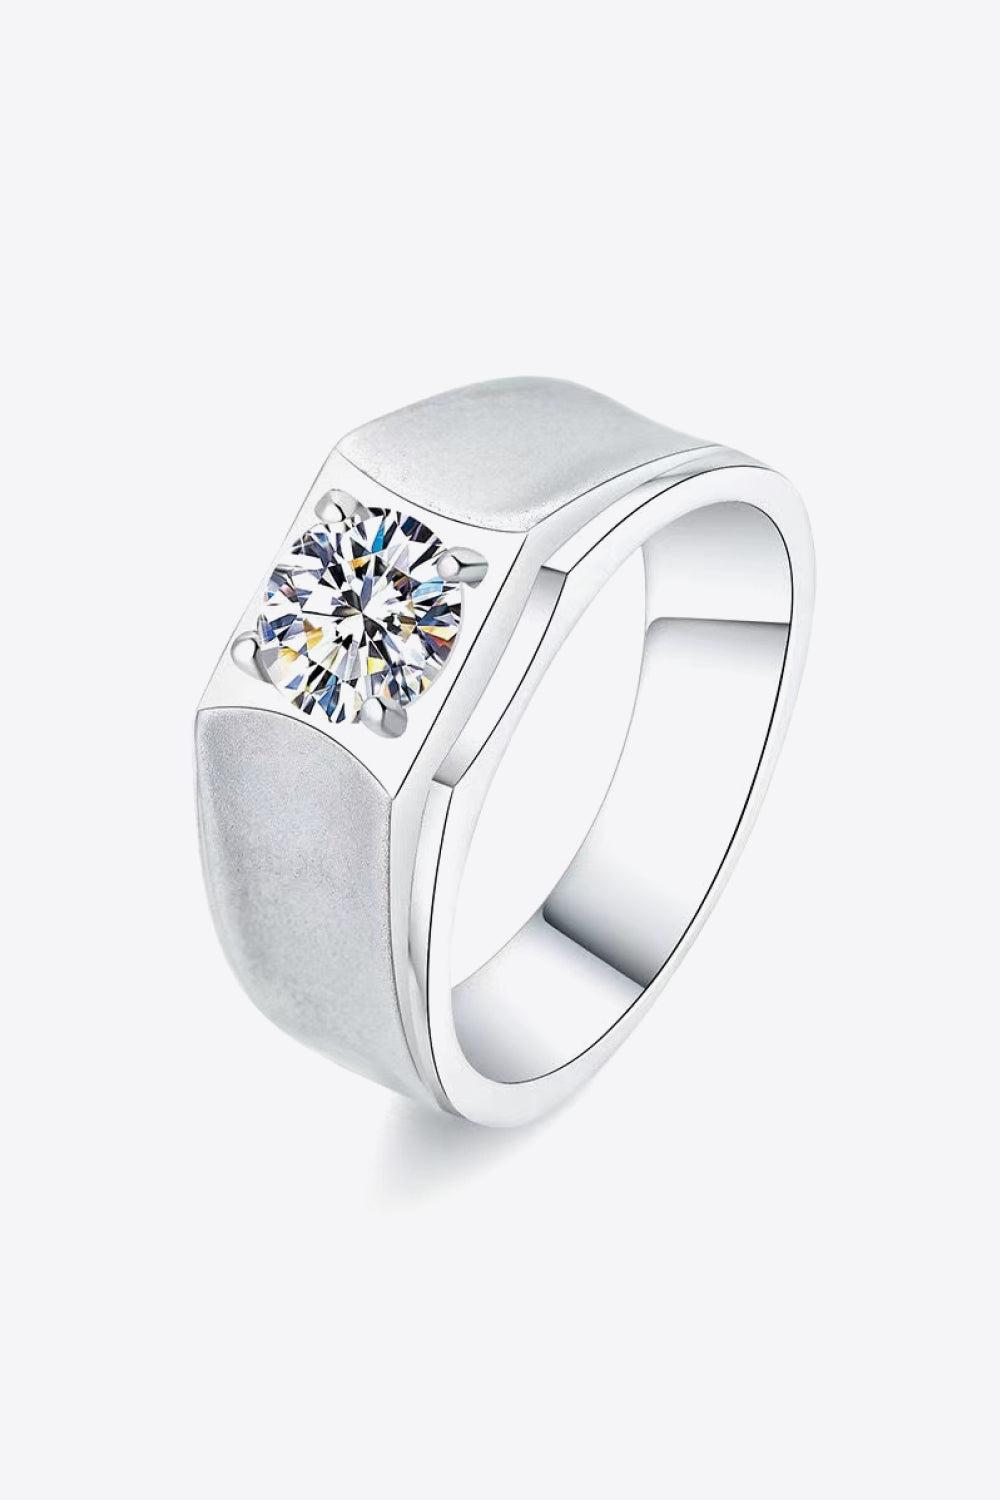 1 Carat Moissanite Wide Band Ring BLUE ZONE PLANET